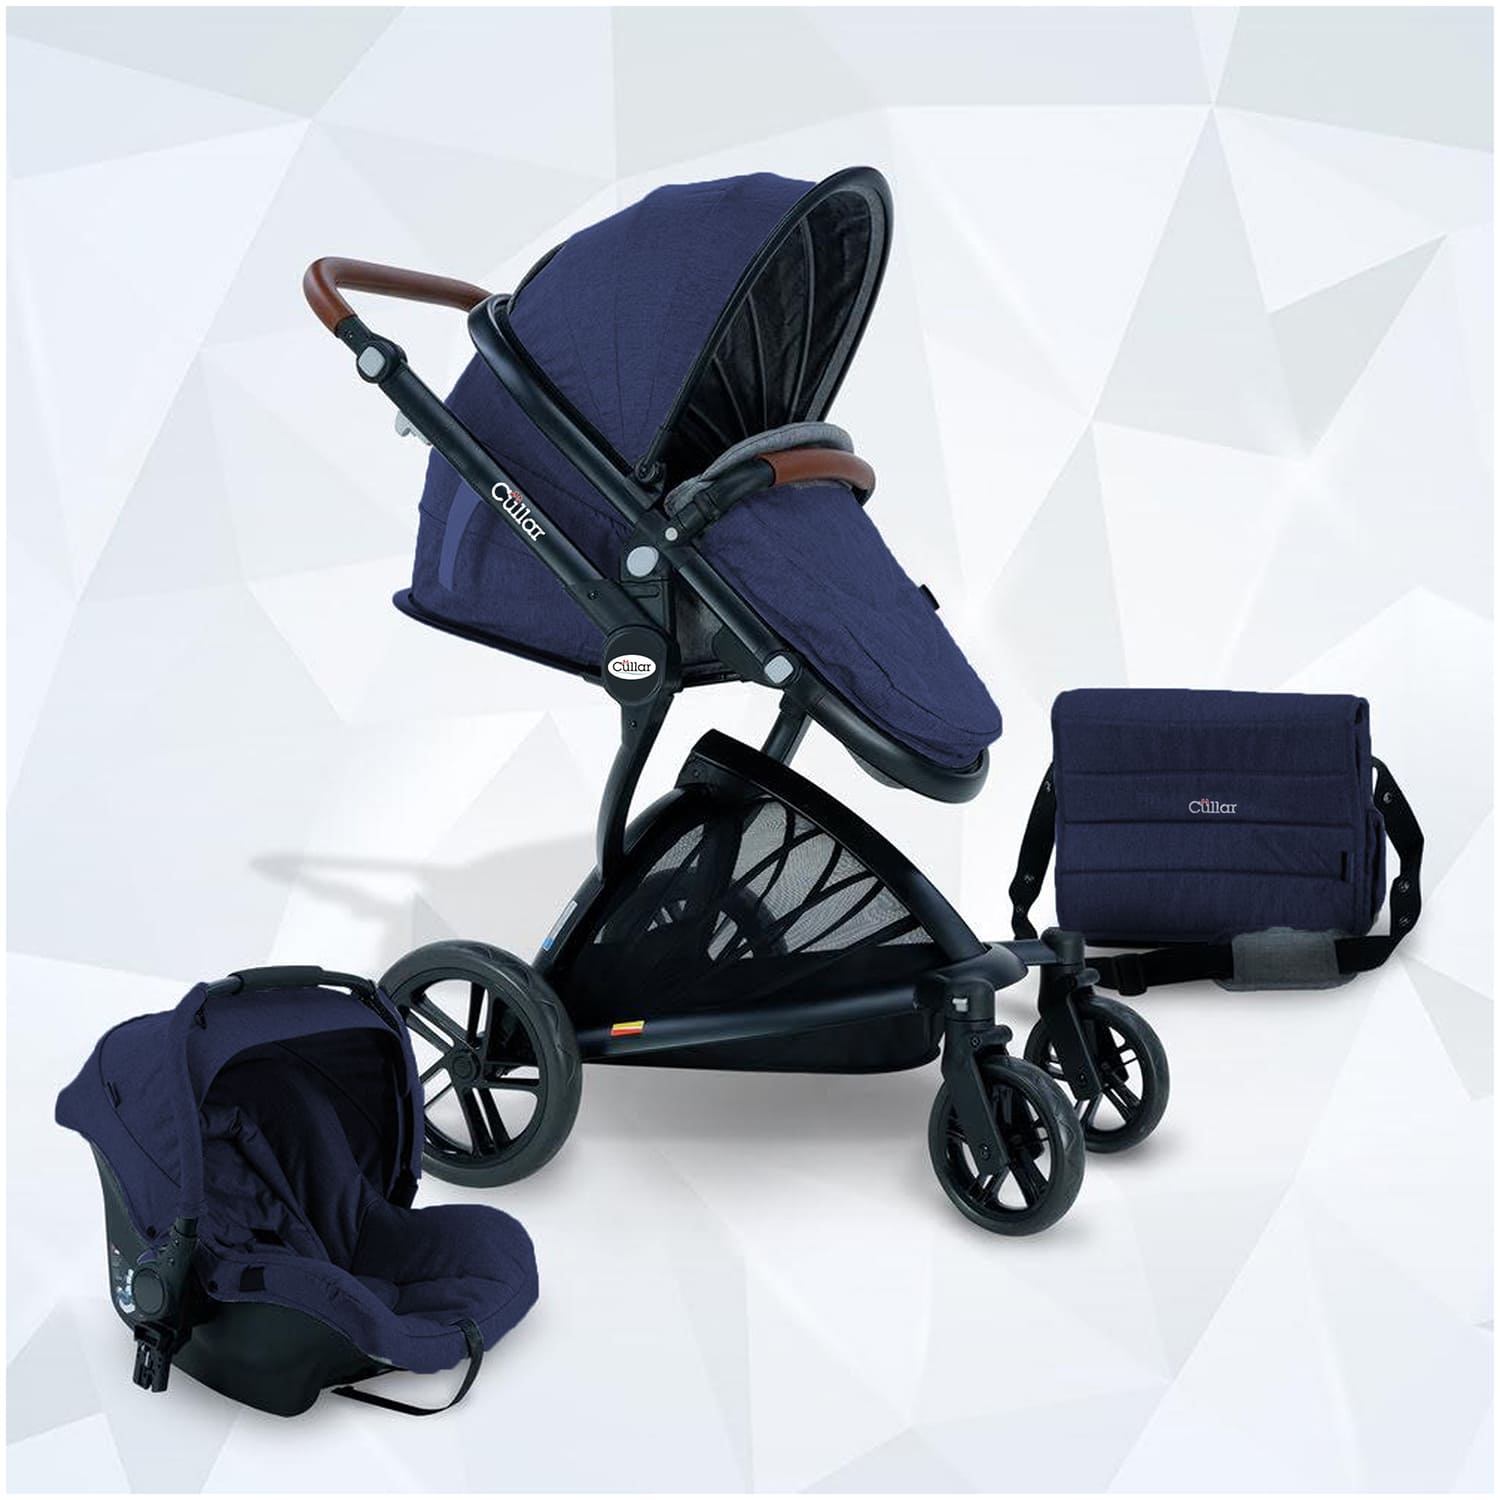 Safe and Comfortable Car Seat Stroller for Babies - On-the-go Convenience